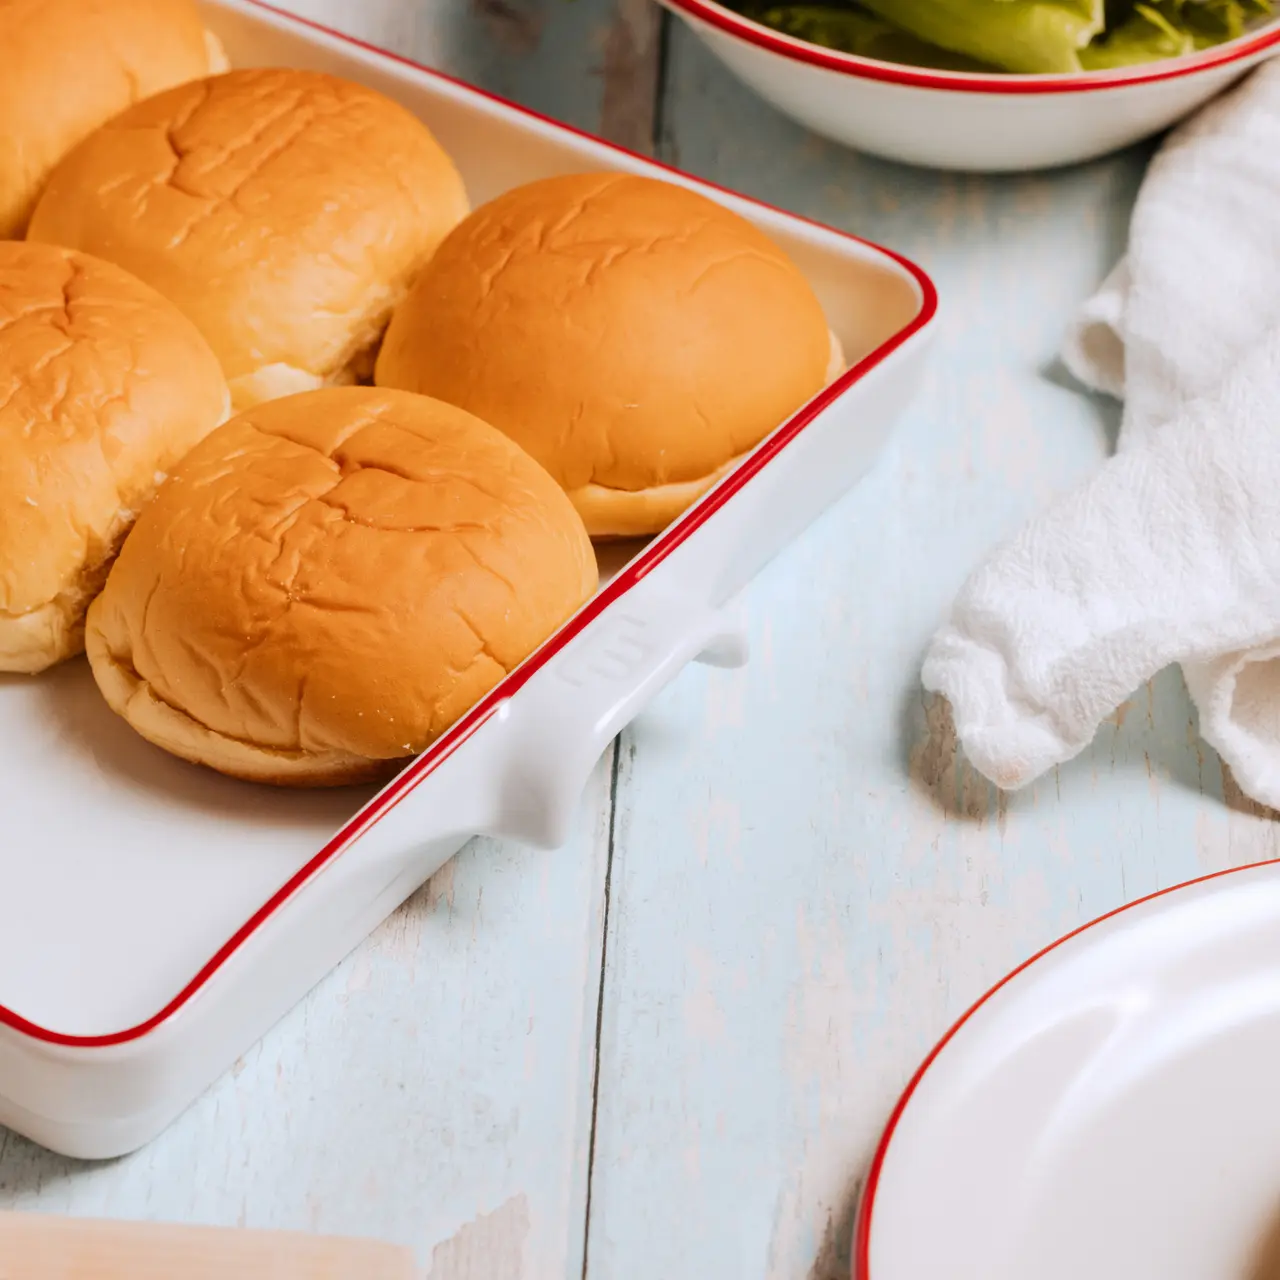 Fresh buns are arranged neatly on a white tray next to a bowl of greens, suggesting preparation for a meal.